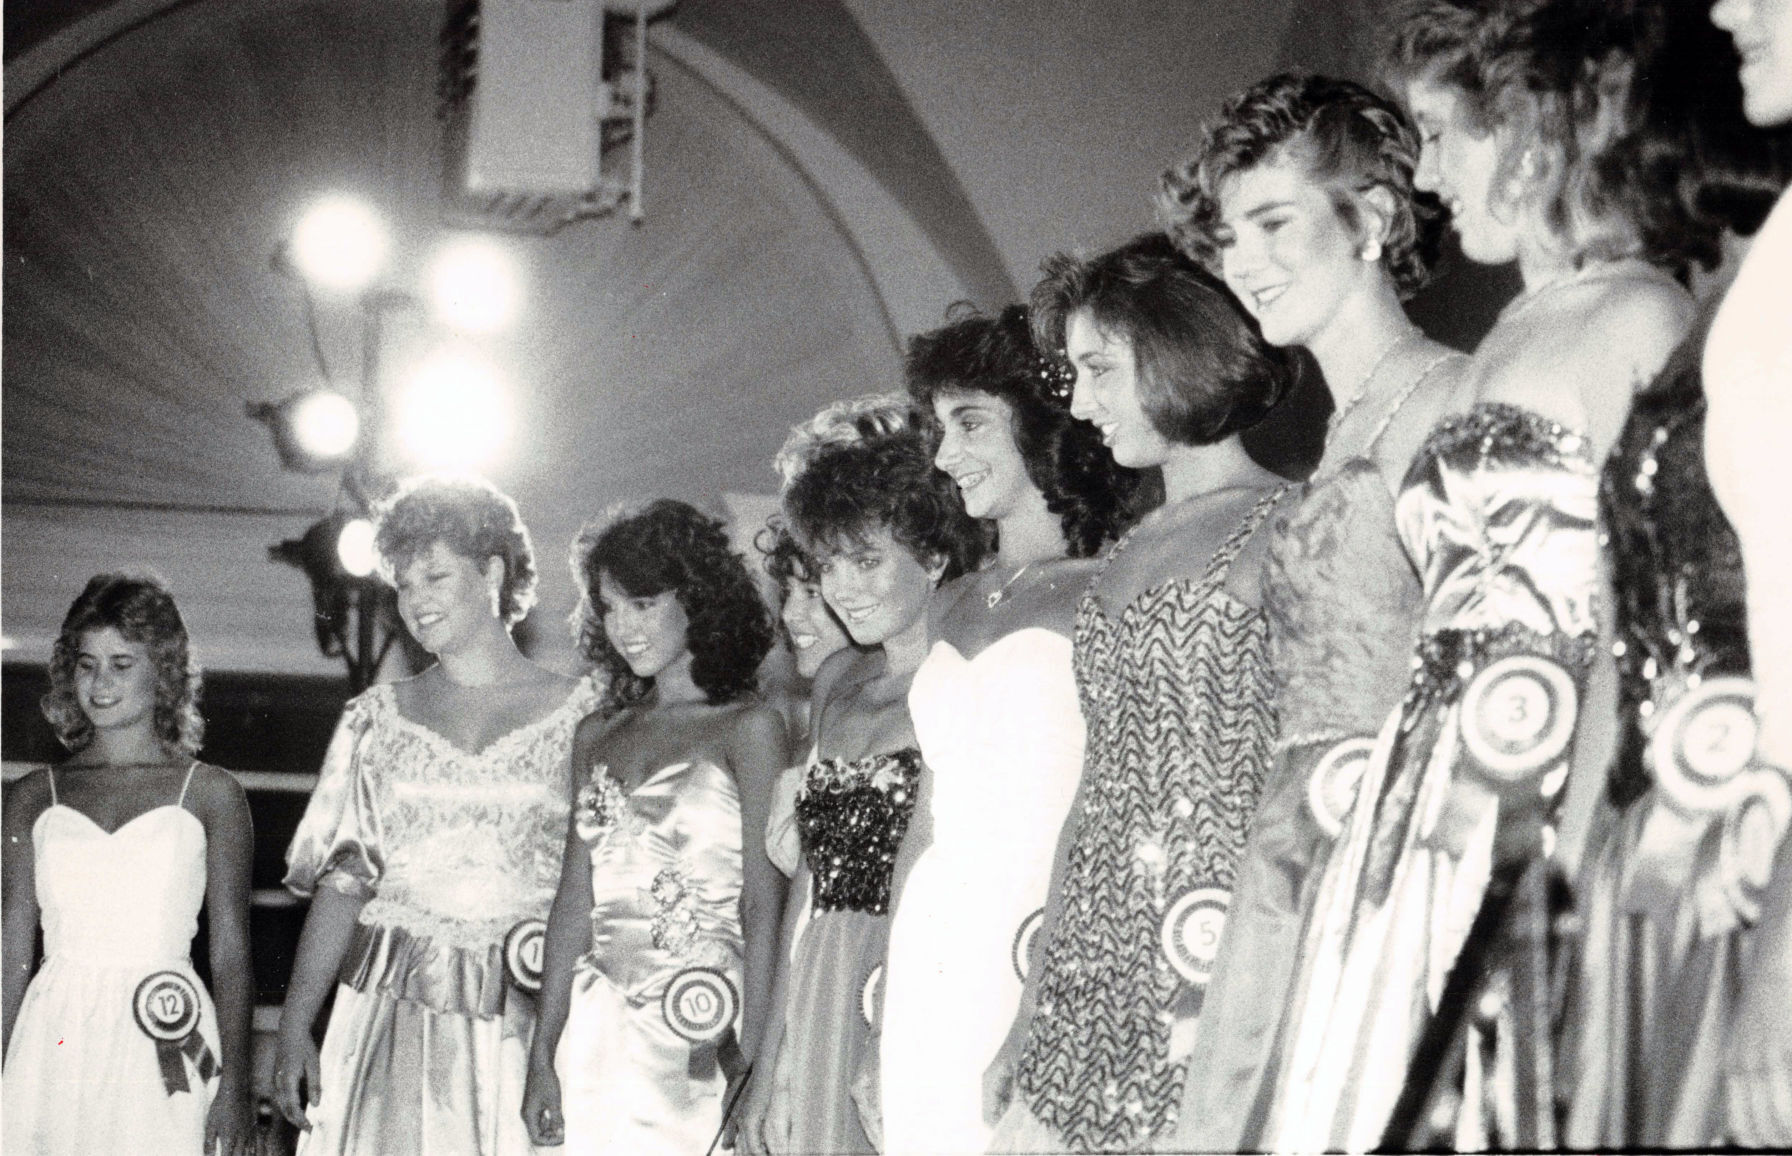 GALLERY: Look back at local pageants through the years